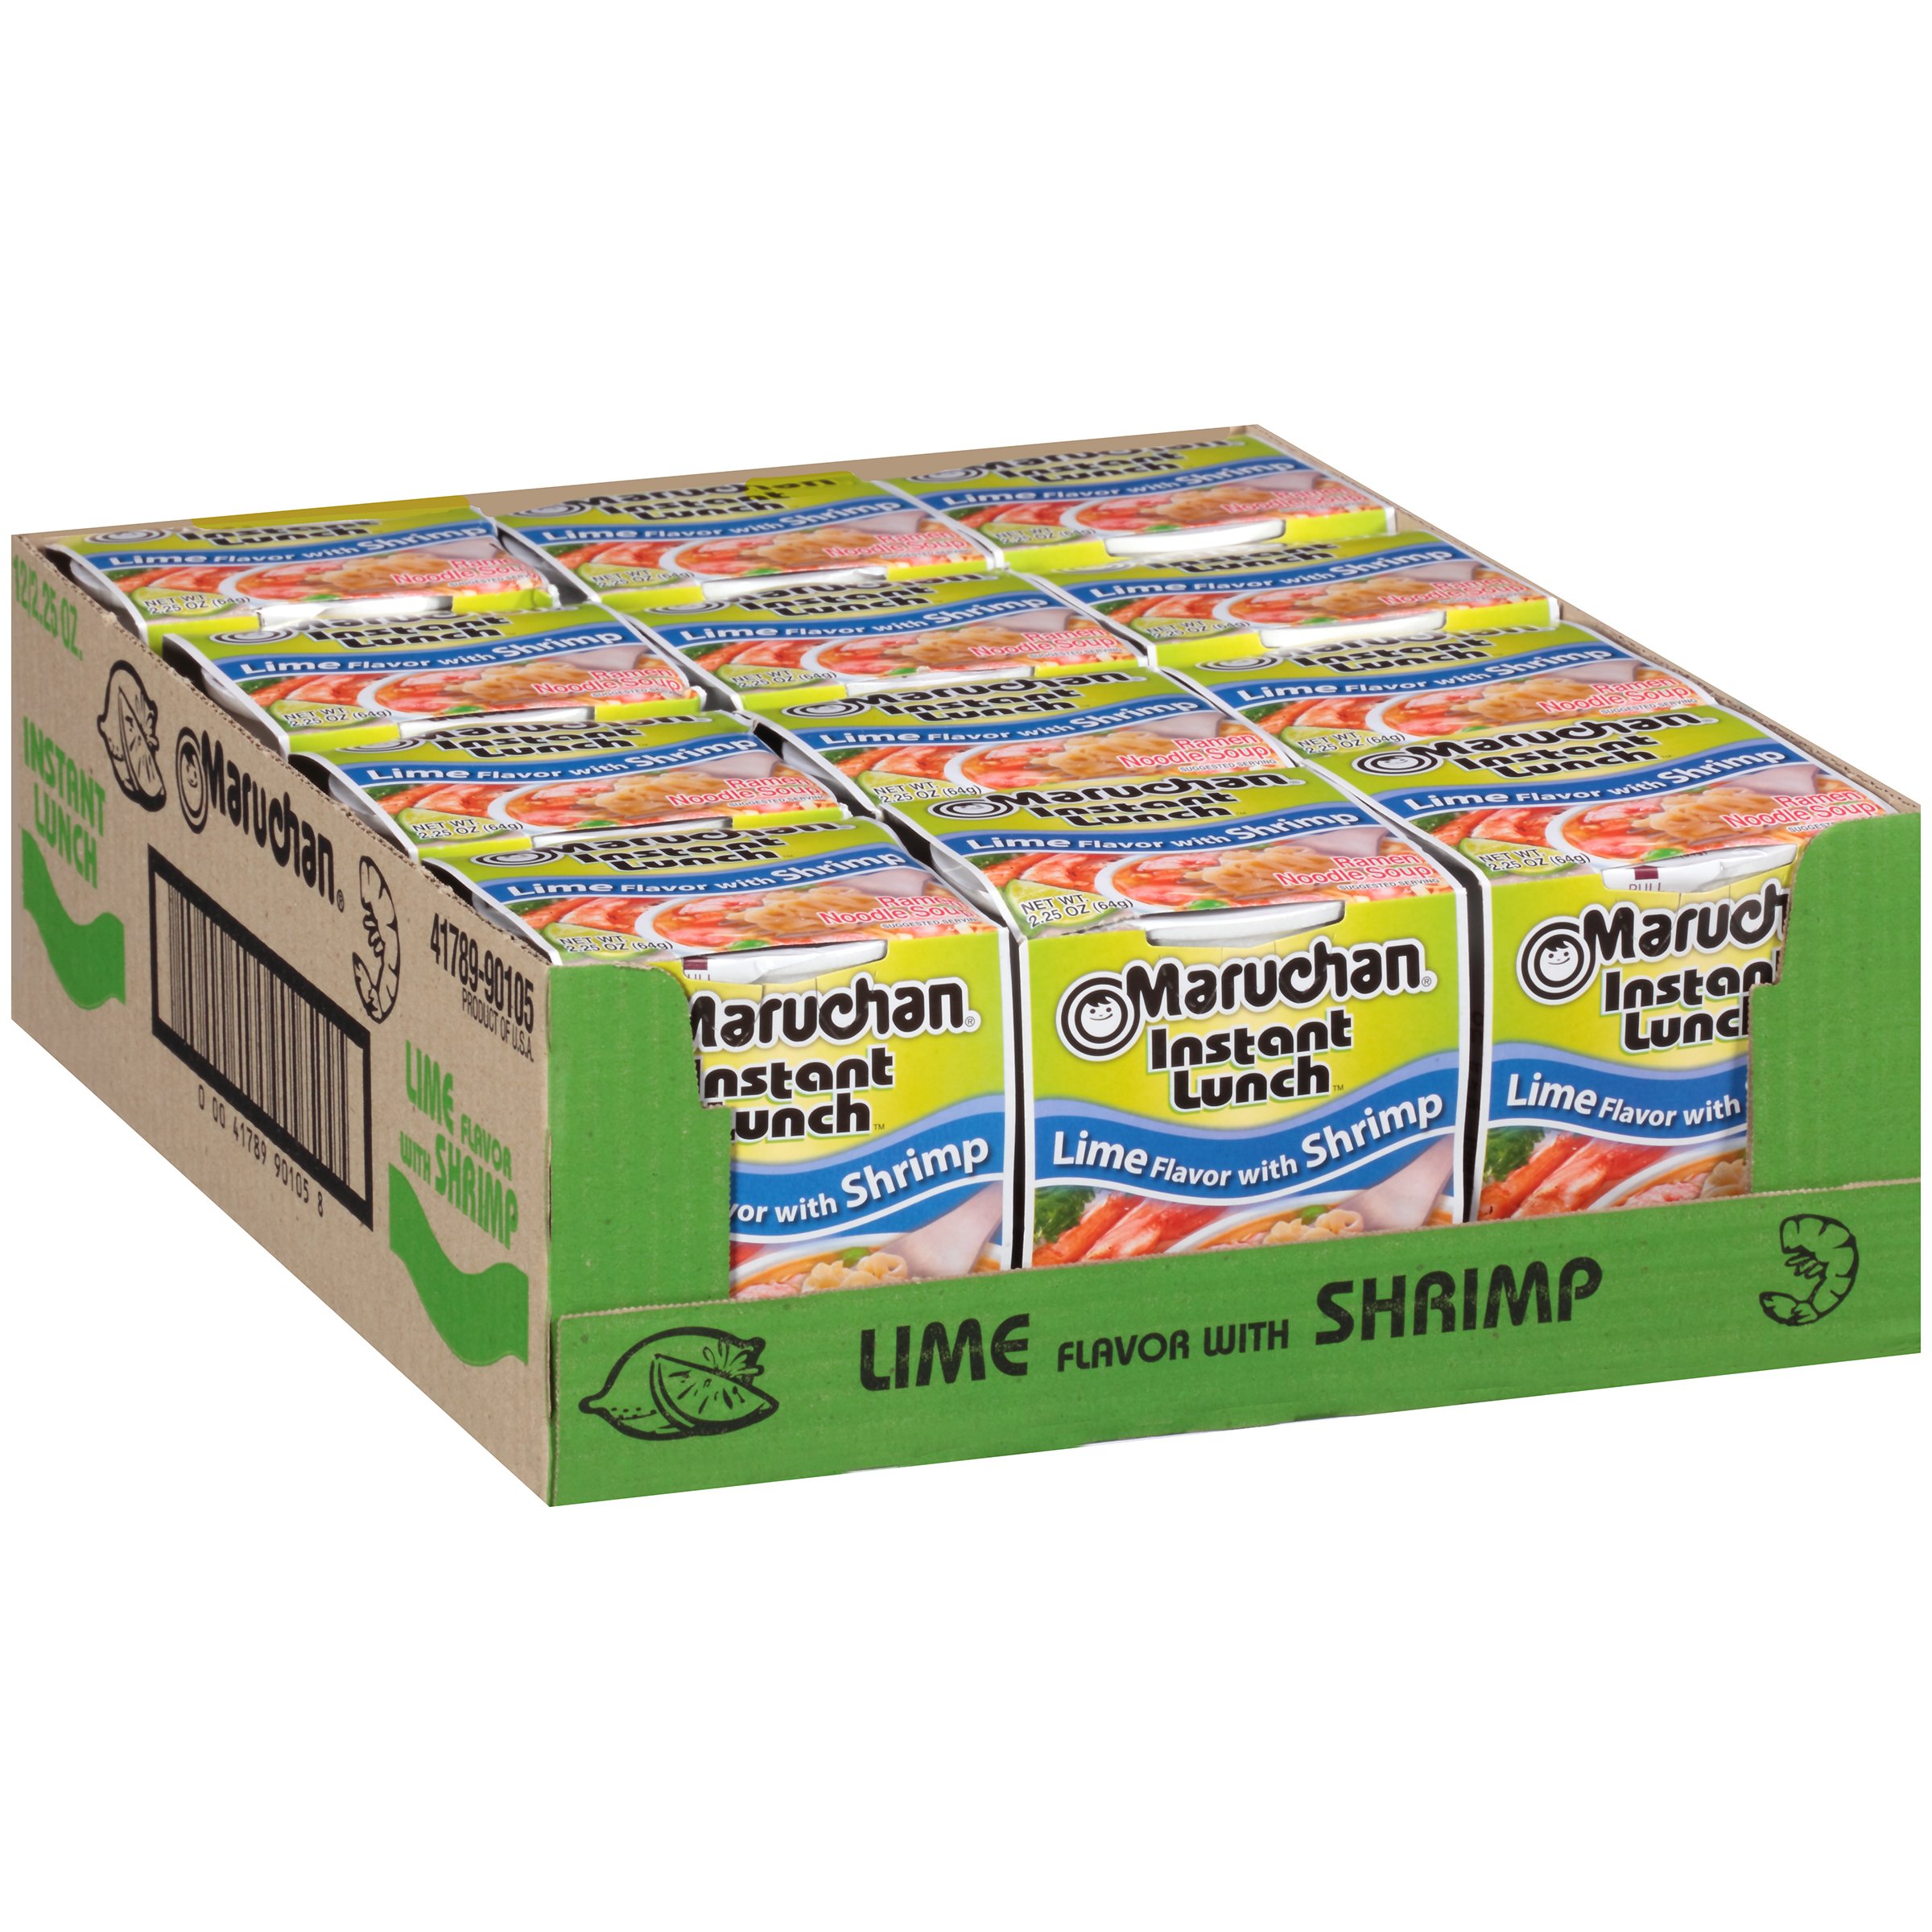 12-Pack 2.25-Oz Maruchan Instant Lunch (Lime Flavor w/ Shrimp) $4.45 + Free Shipping w/ Prime or on $25+